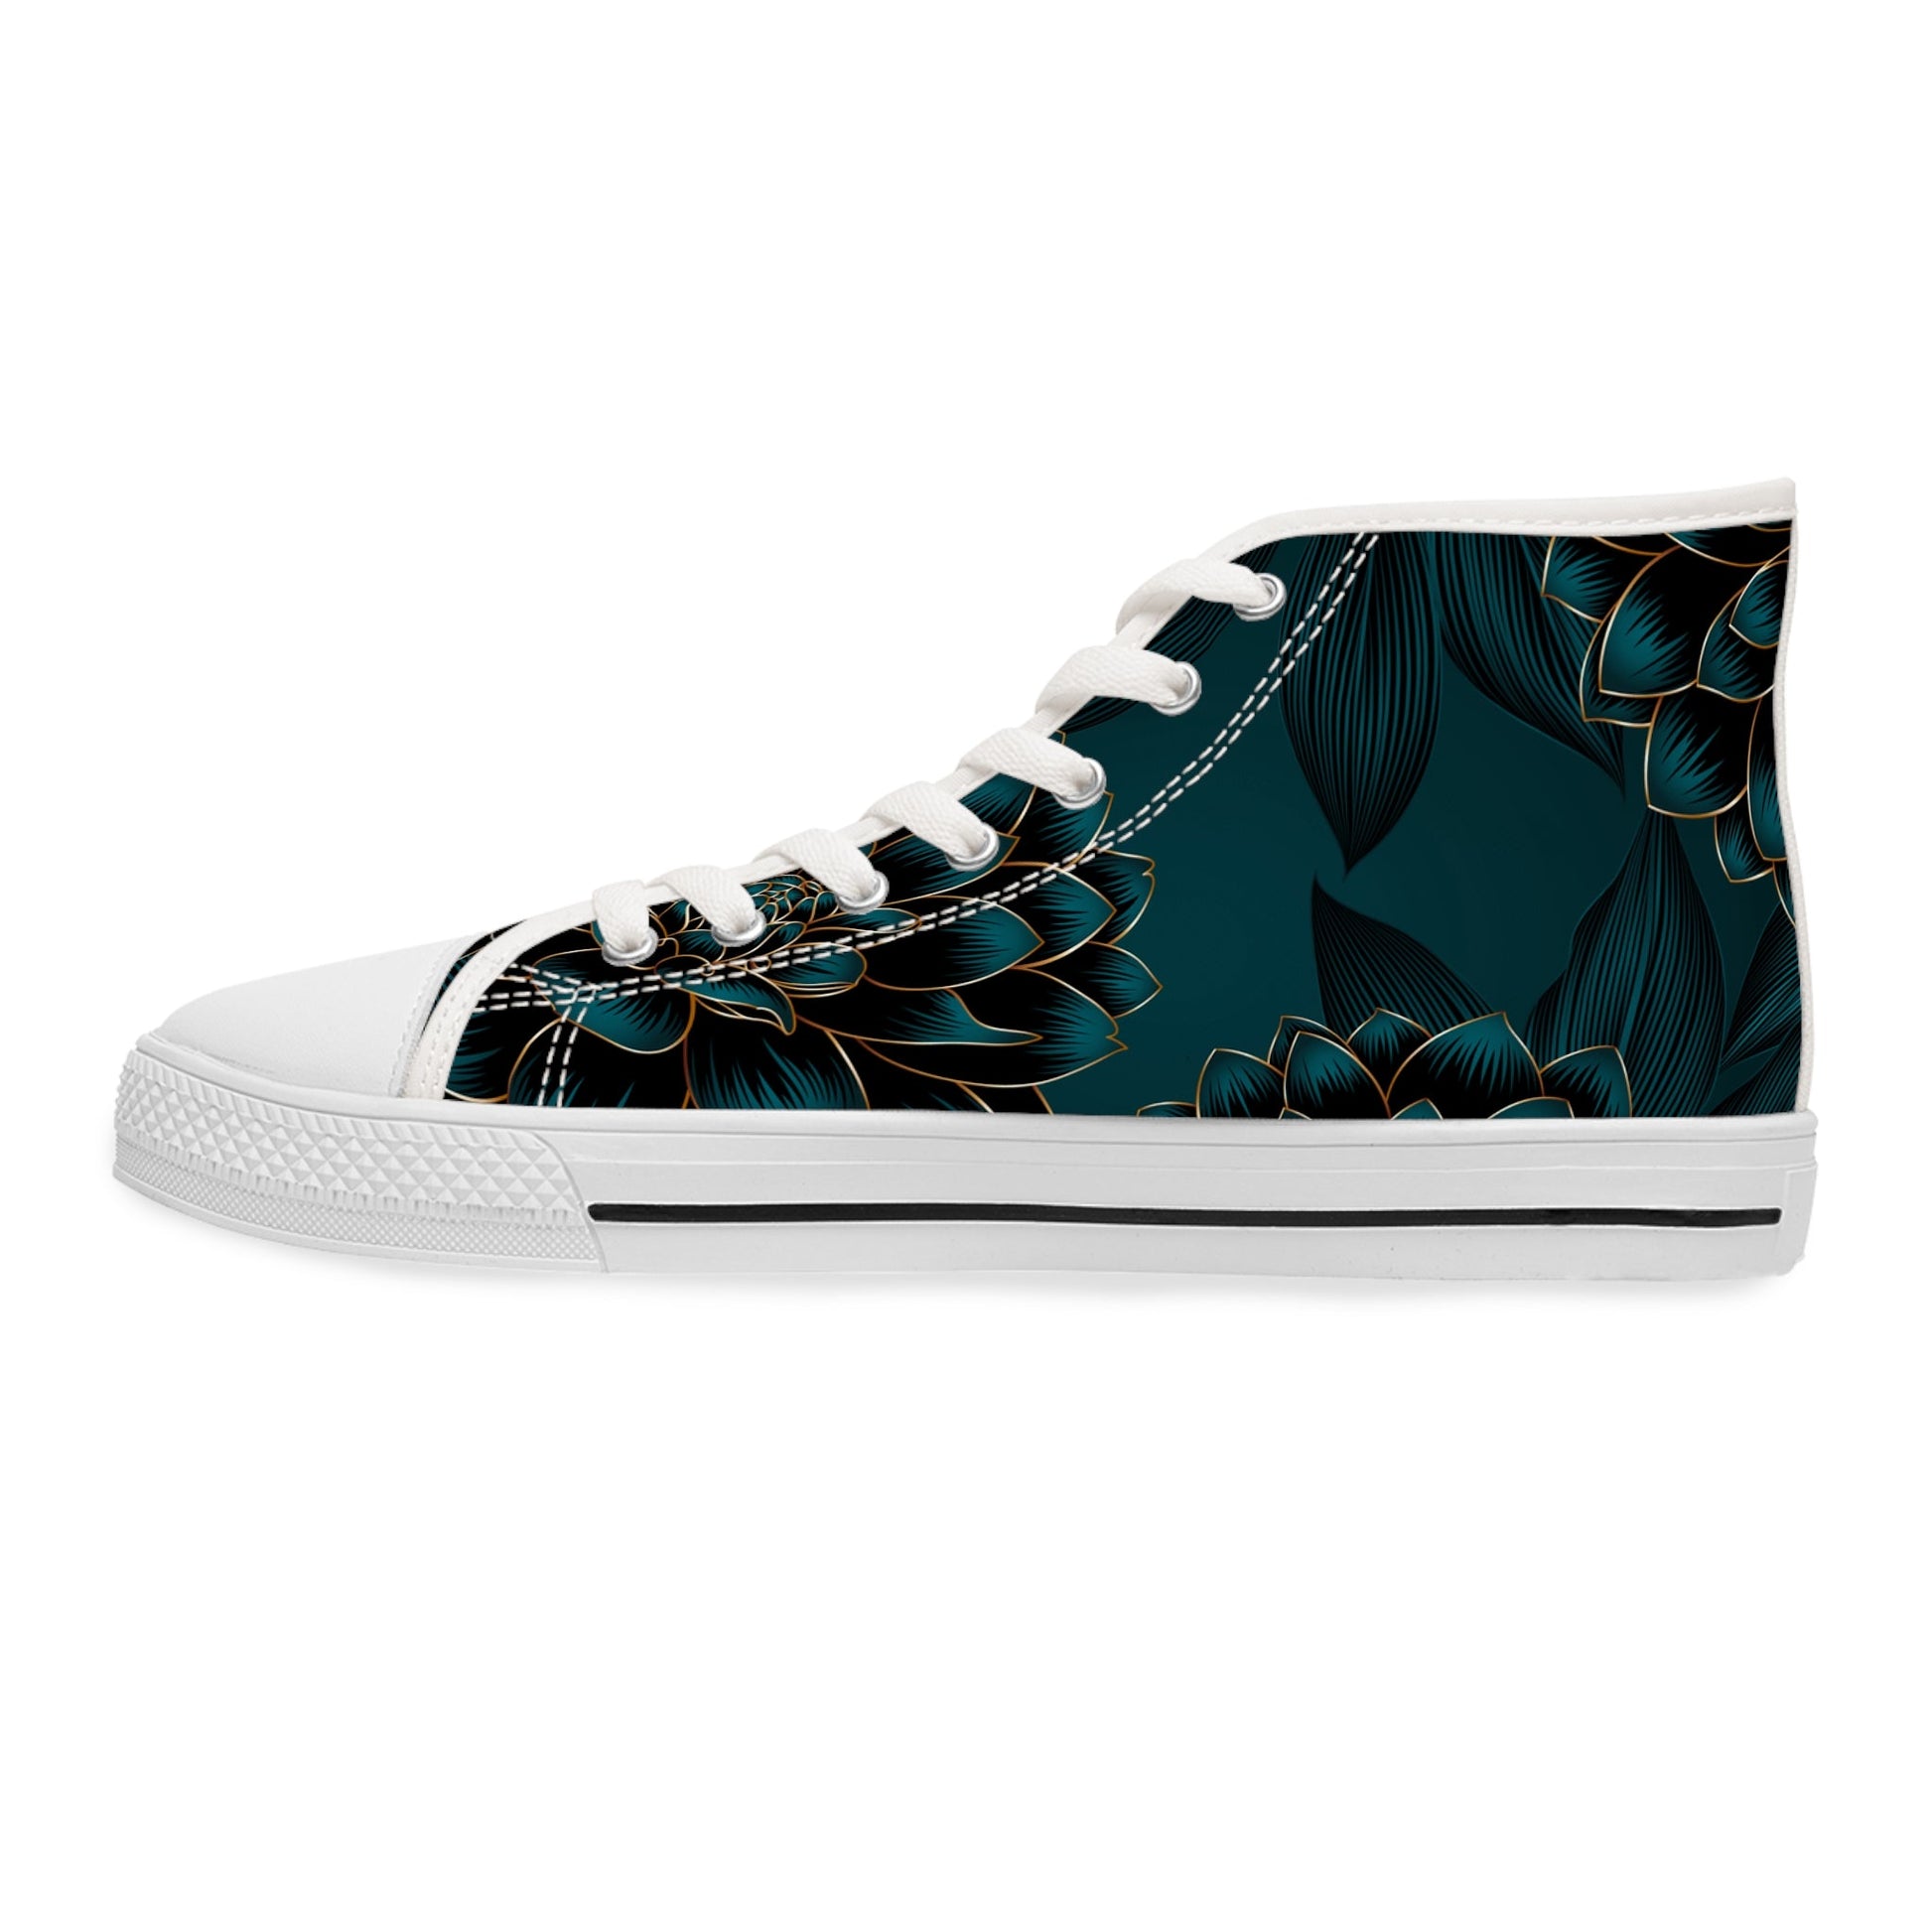 Shoes - Women's Floral High Top Sneakers